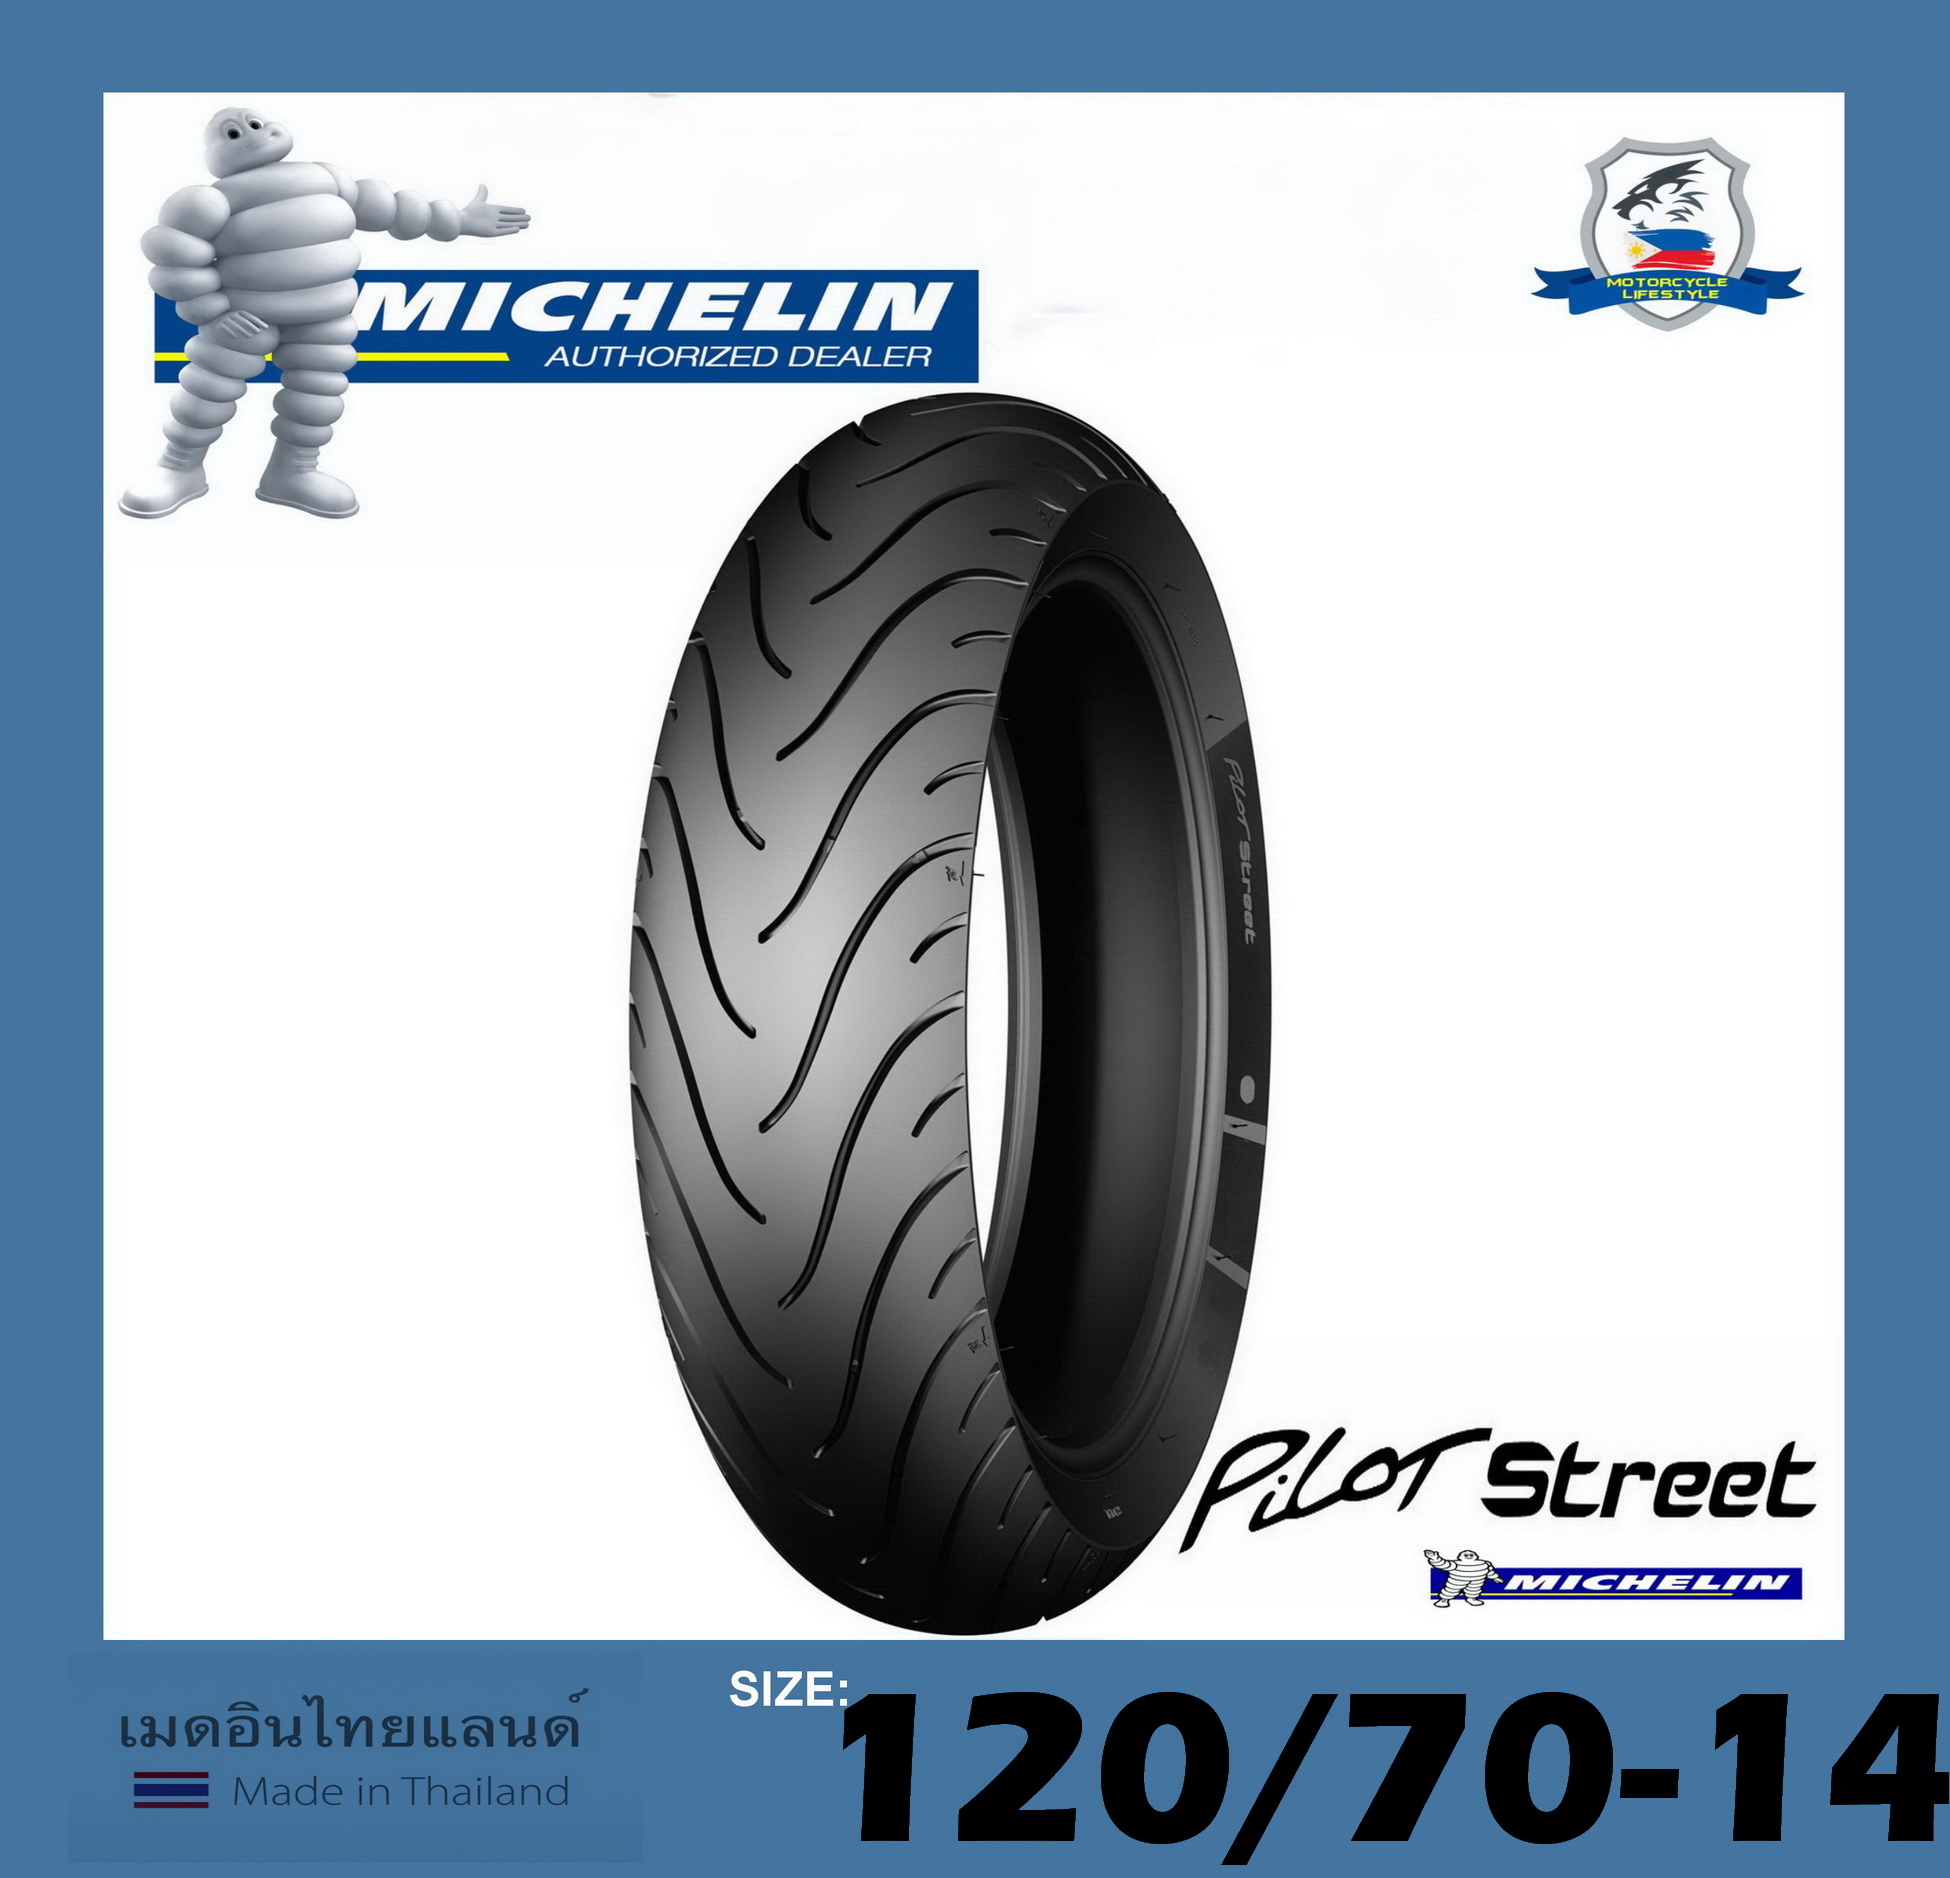 Buy Michelin Top Products At Best Prices Online Lazada Com Ph